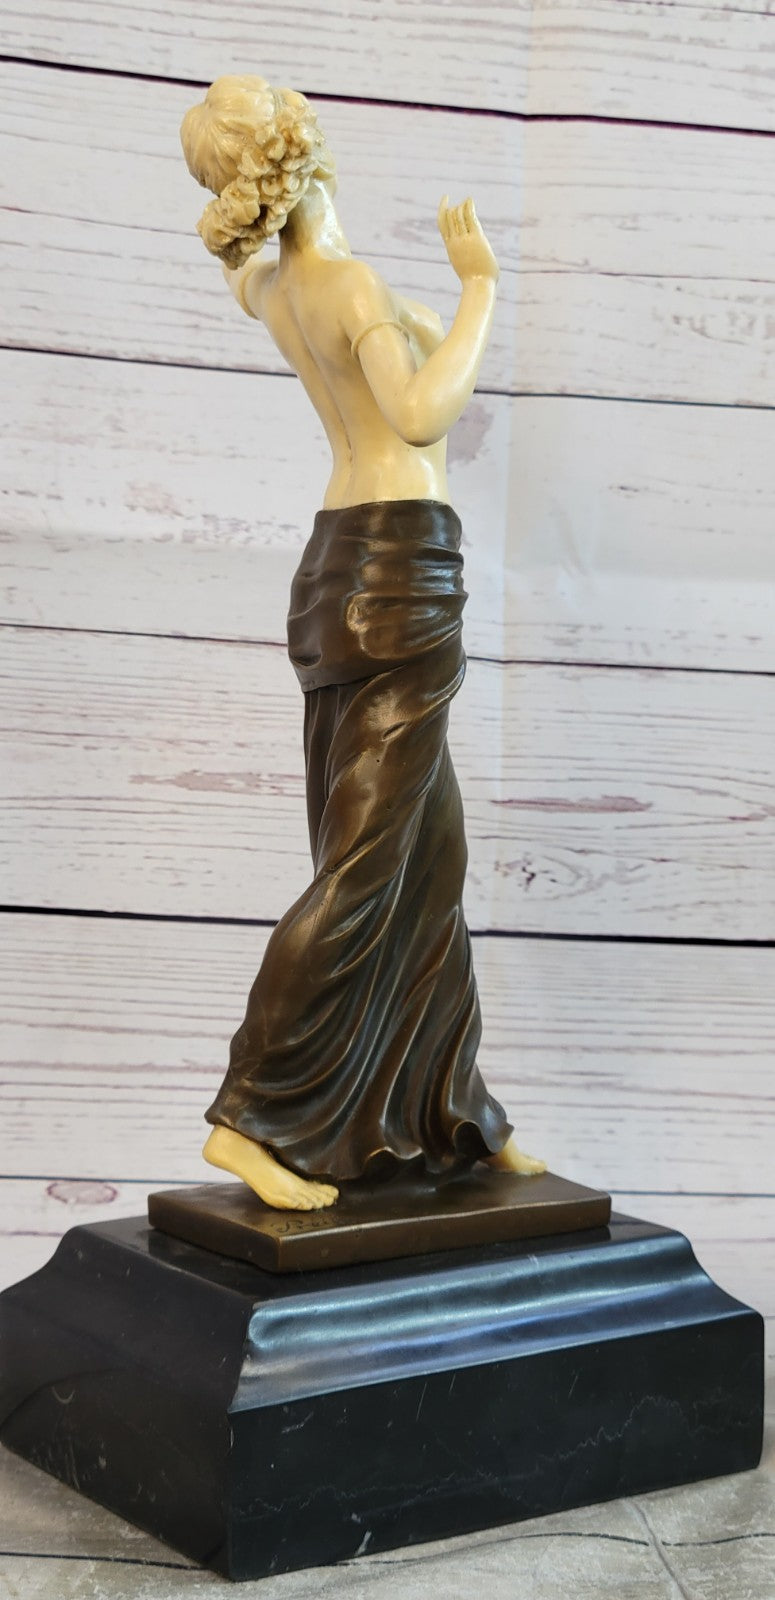 Combination of Real Bronze and Decor Sculpture Hot Cast Erotic Woman Figure